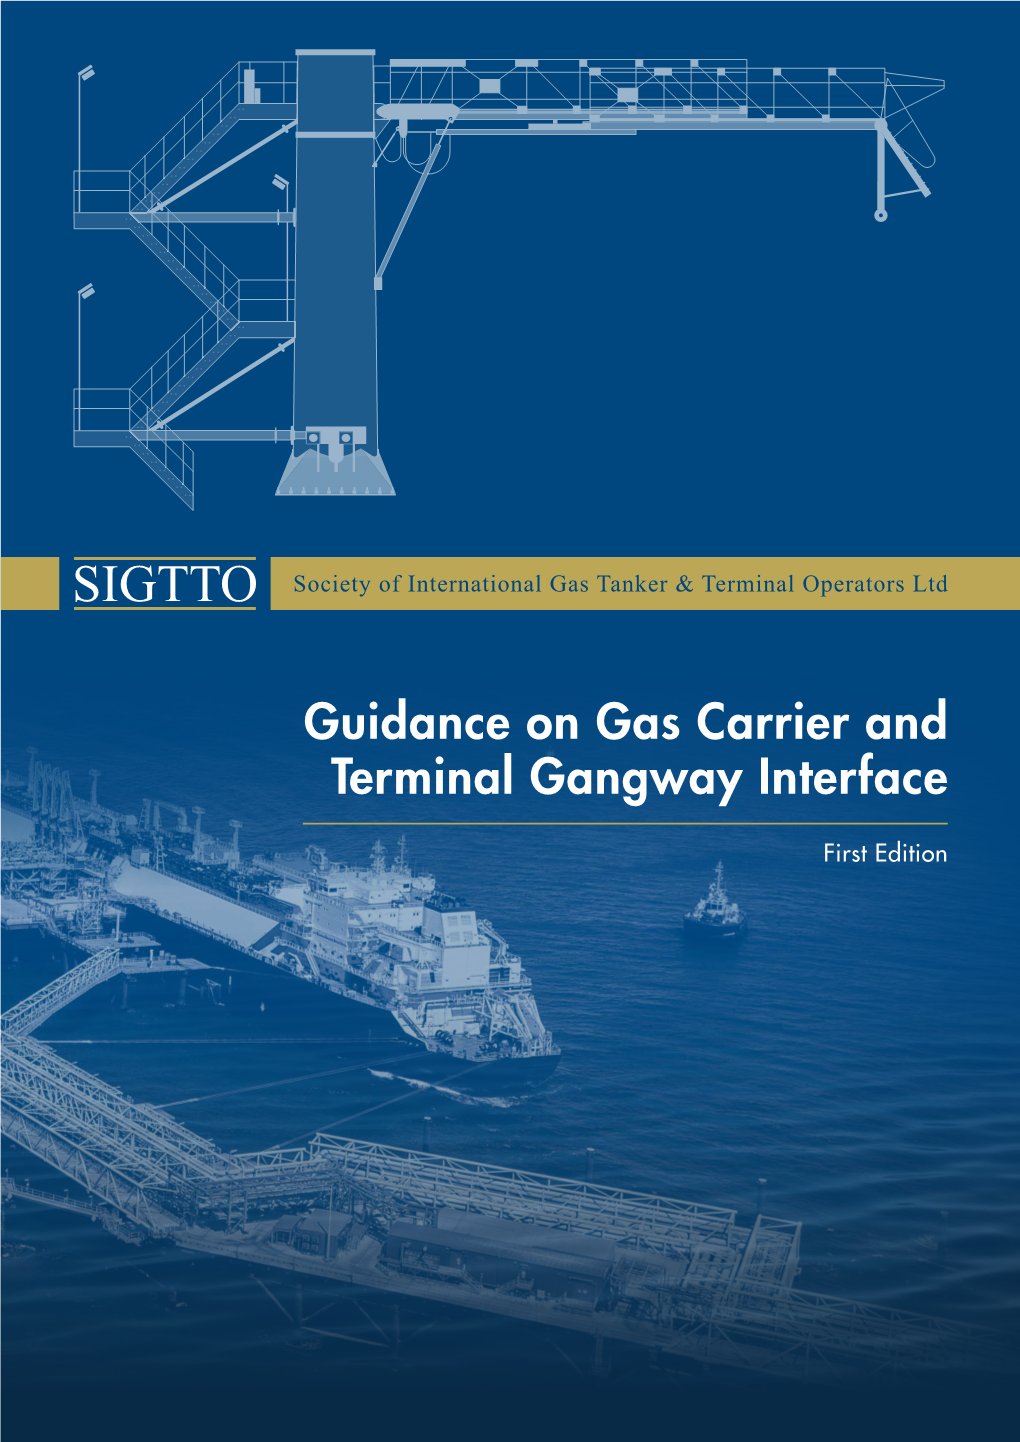 Guidance on Gas Carrier and Terminal Gangway Interface